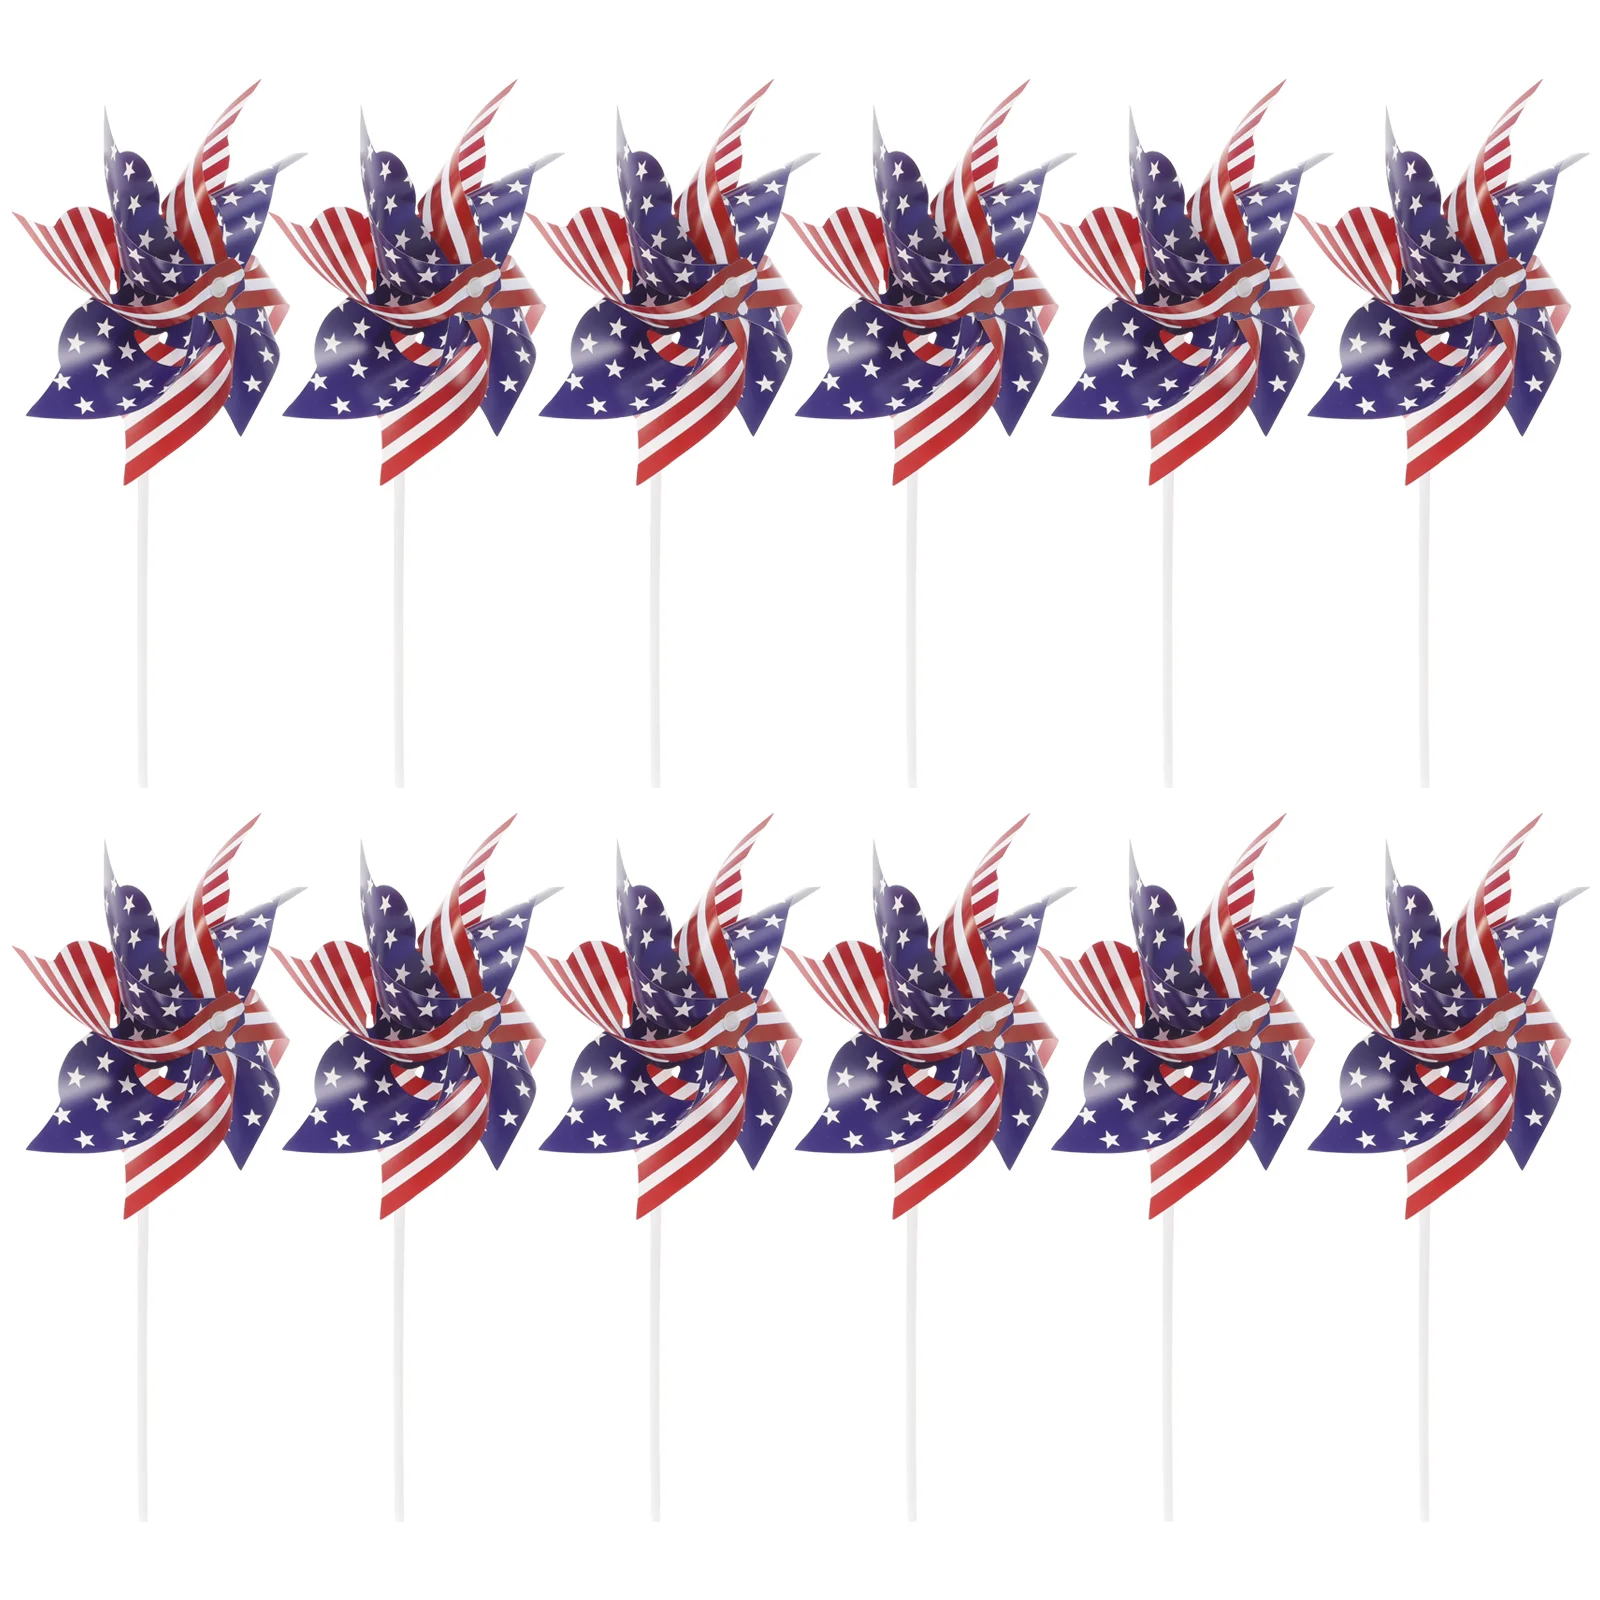 

12 Pcs Garden Pinwheel Wind Spinners Yard Windmills The Independence Day Decor Memorial Decorative Outdoor